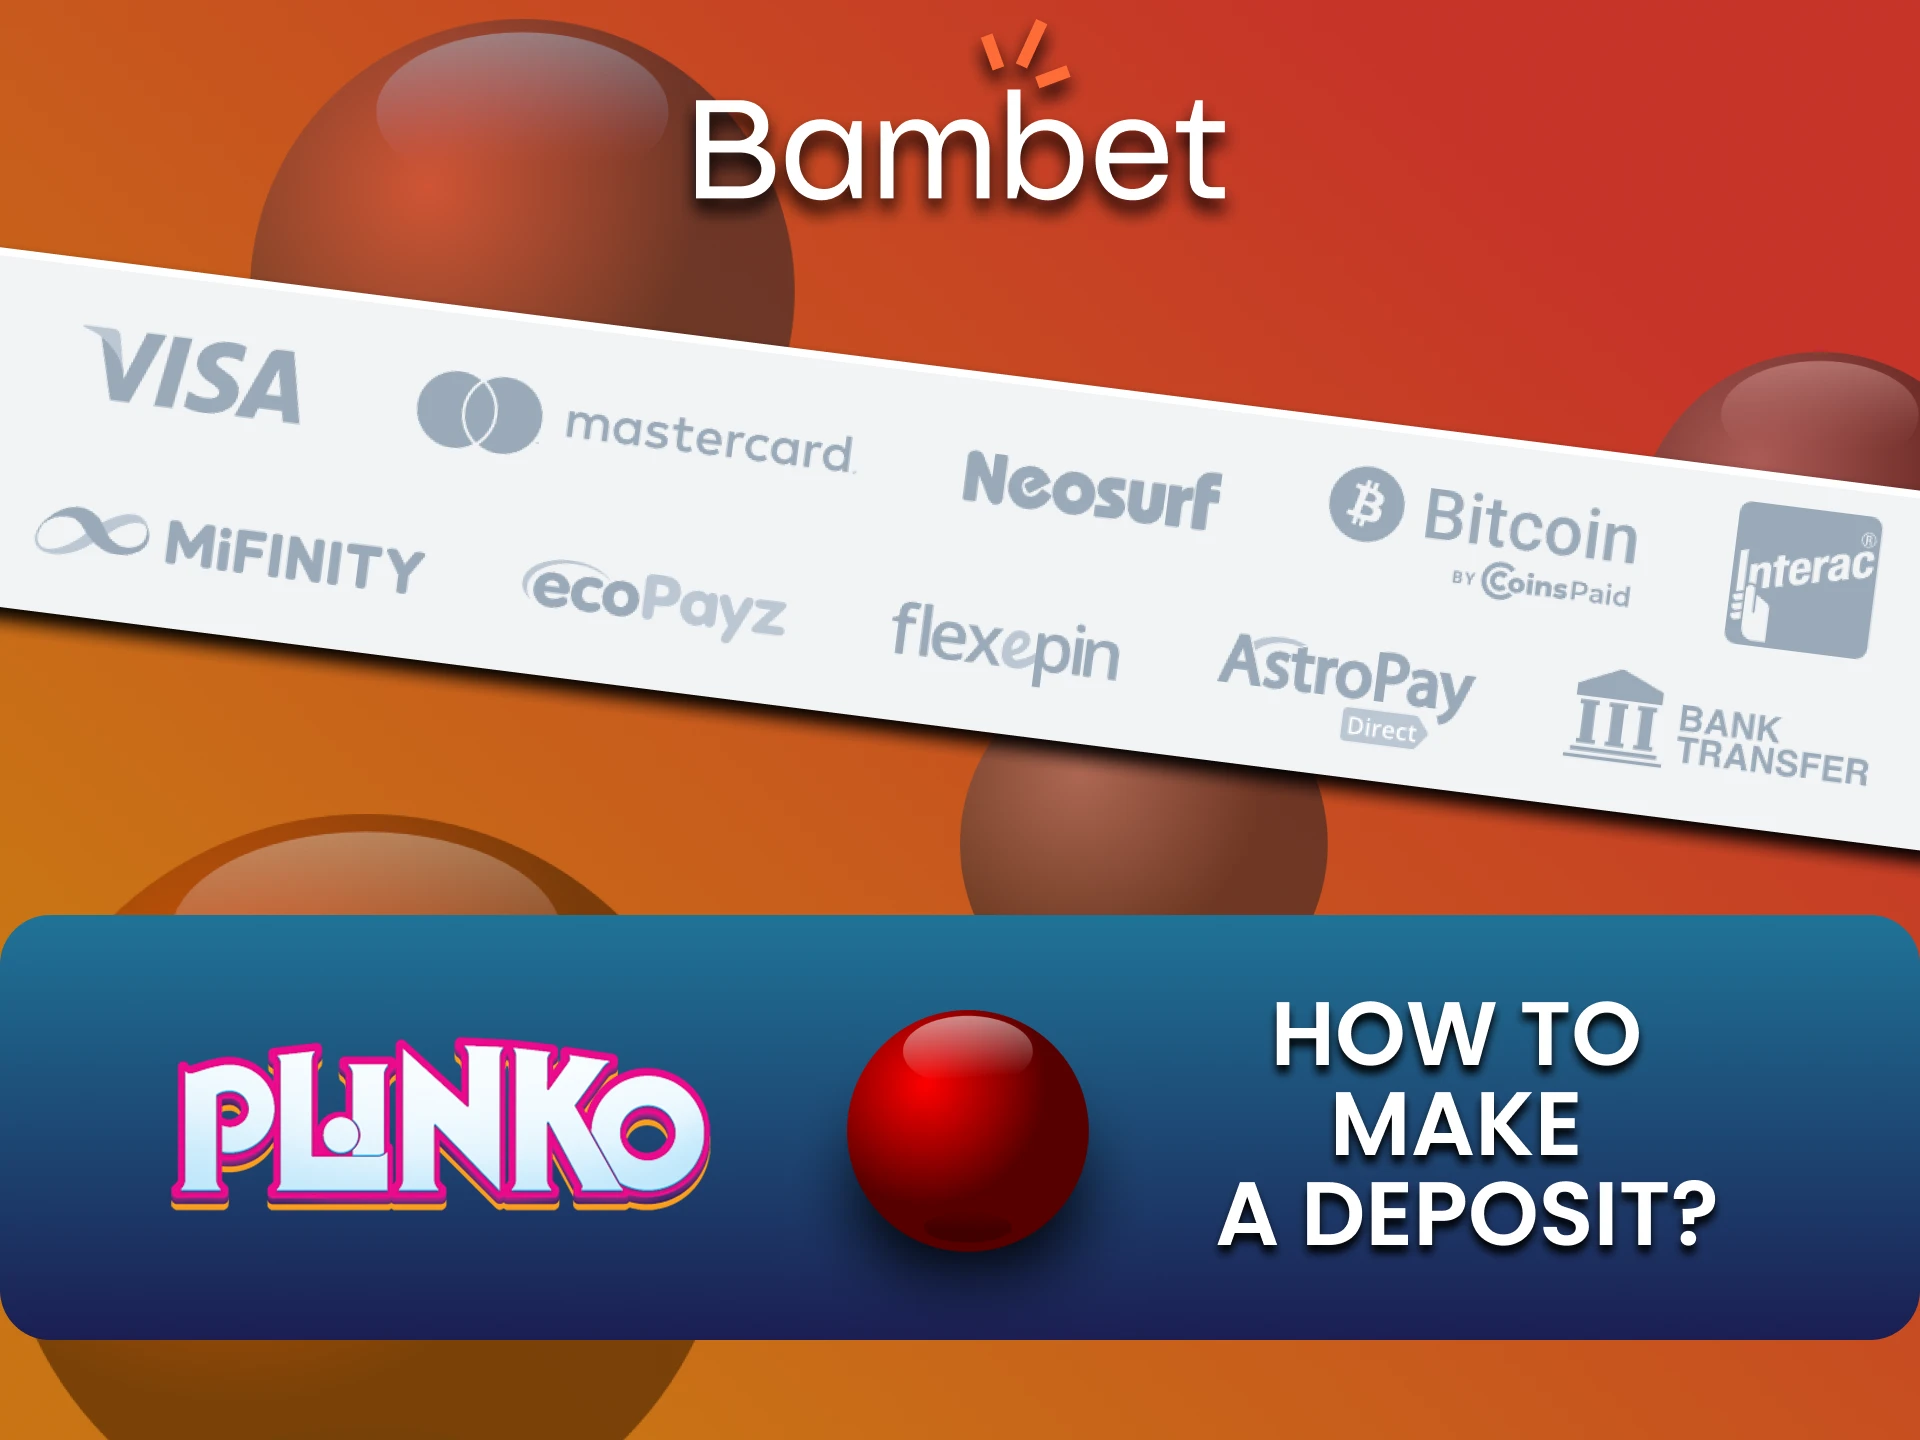 We will tell you about the methods of depositing on Bambet for Plinko.